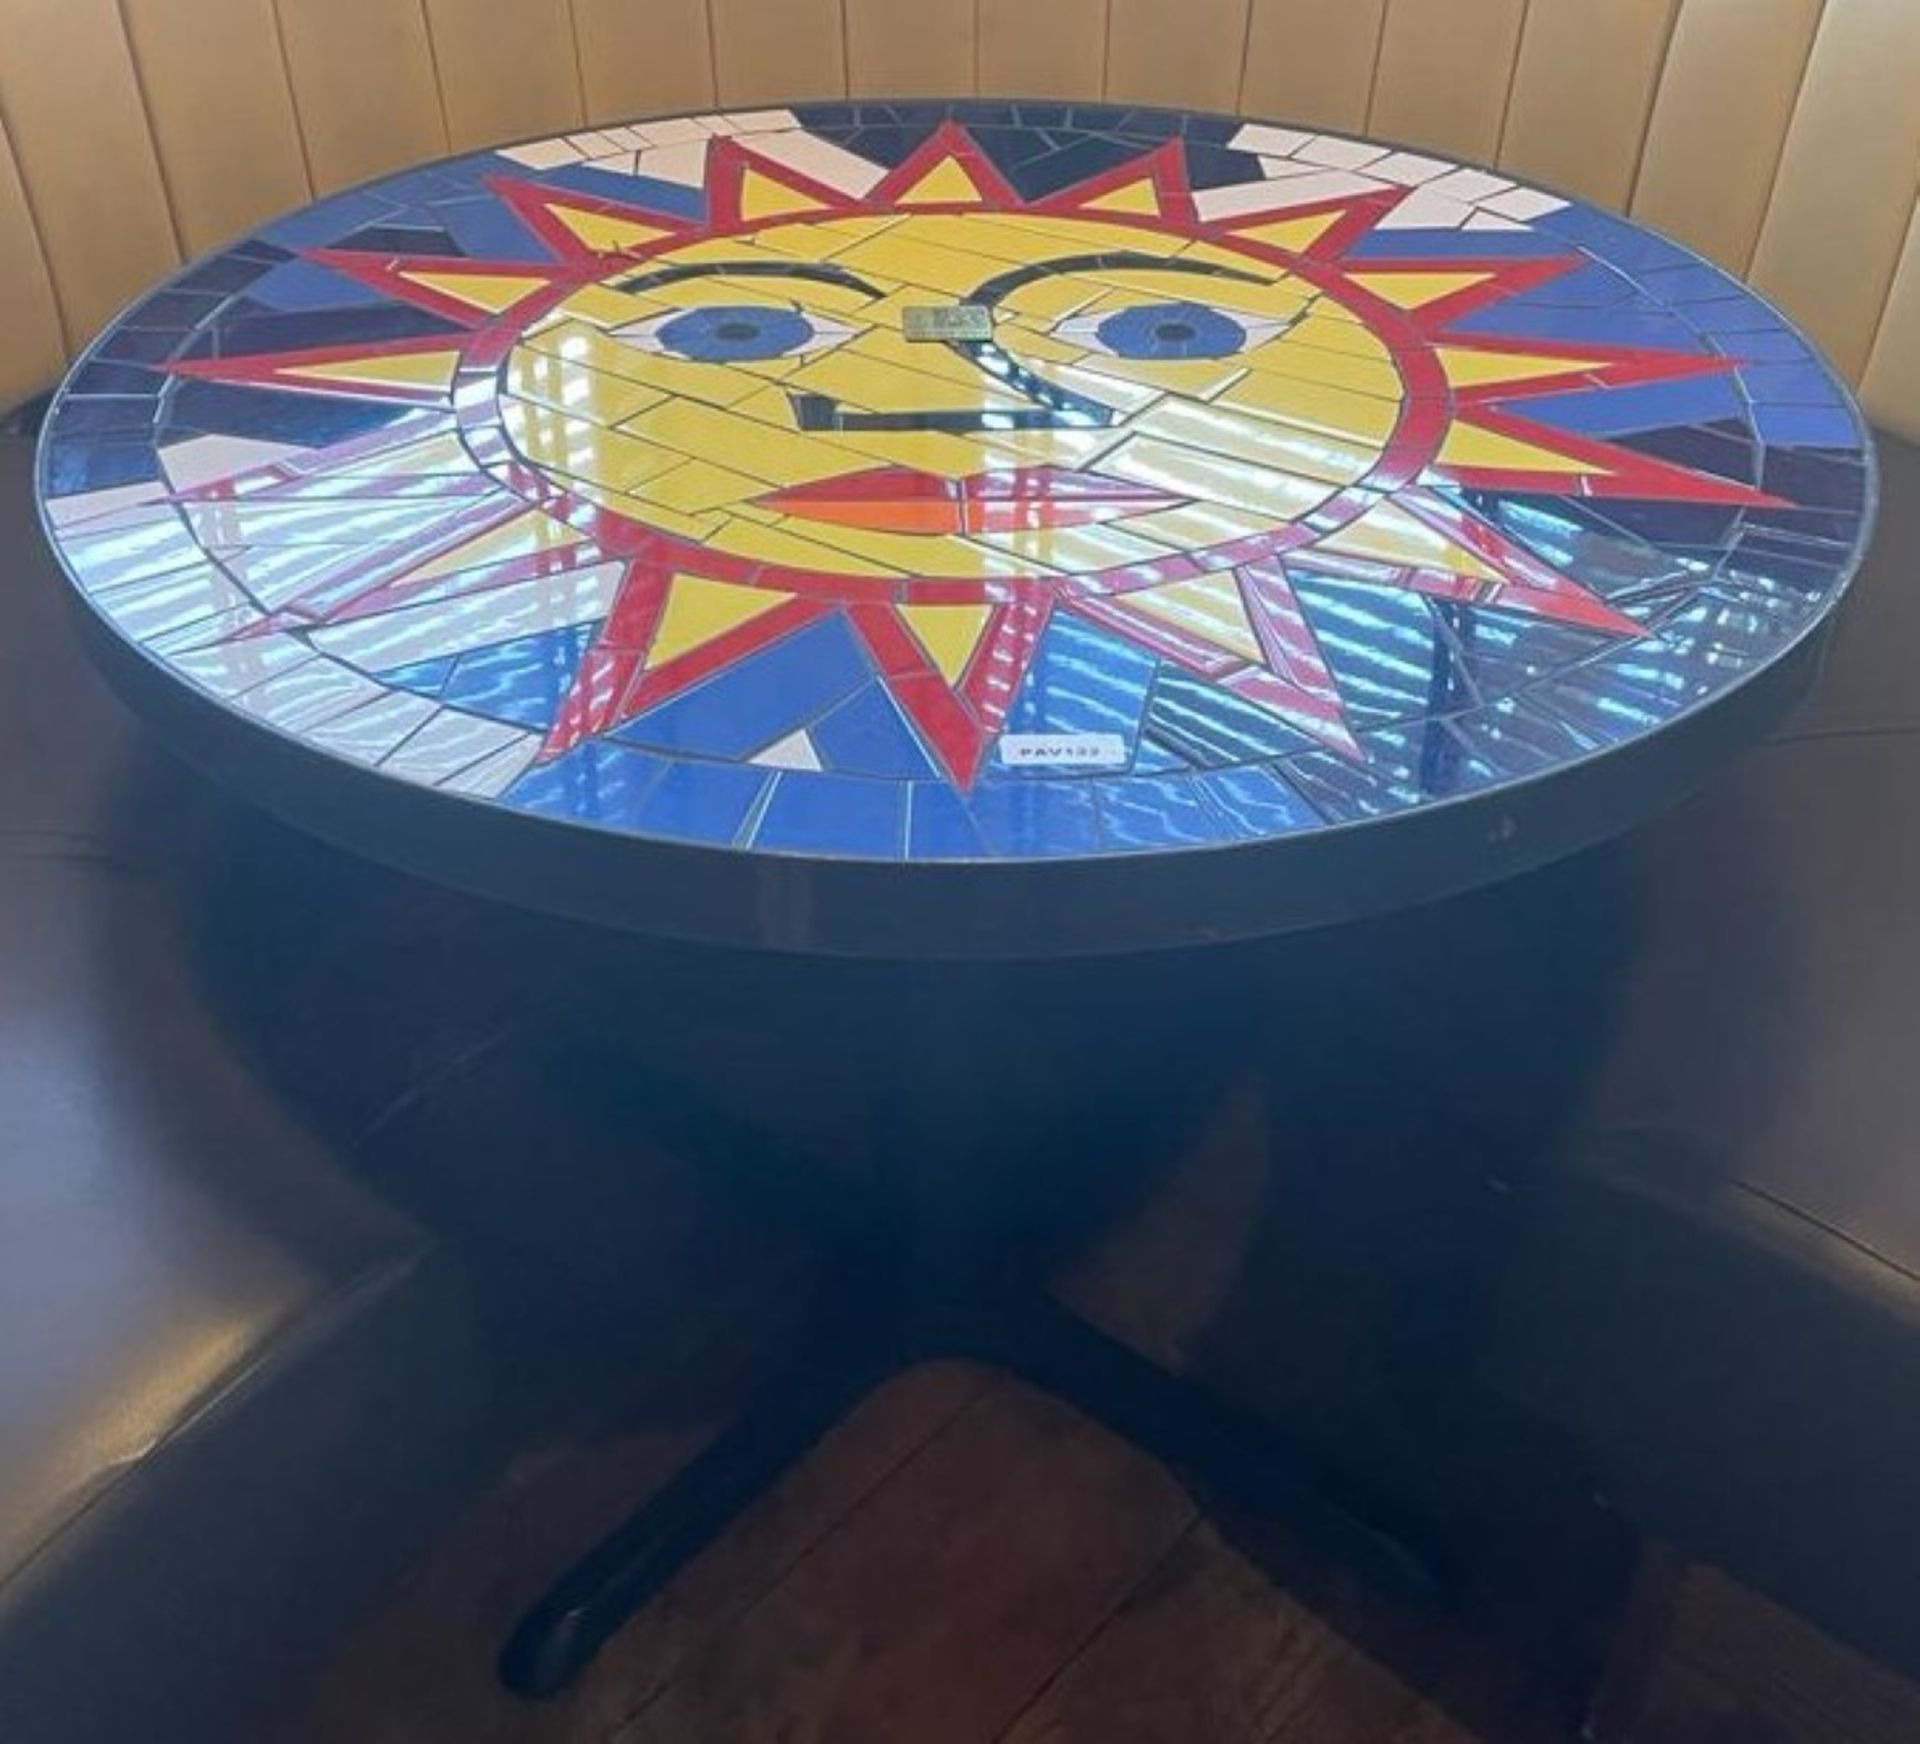 1 x Bespoke Psychedelic Sun Mosaic Dining Table With Cast Iron Base - Ref: PAV122 - Height 74 x - Image 2 of 4